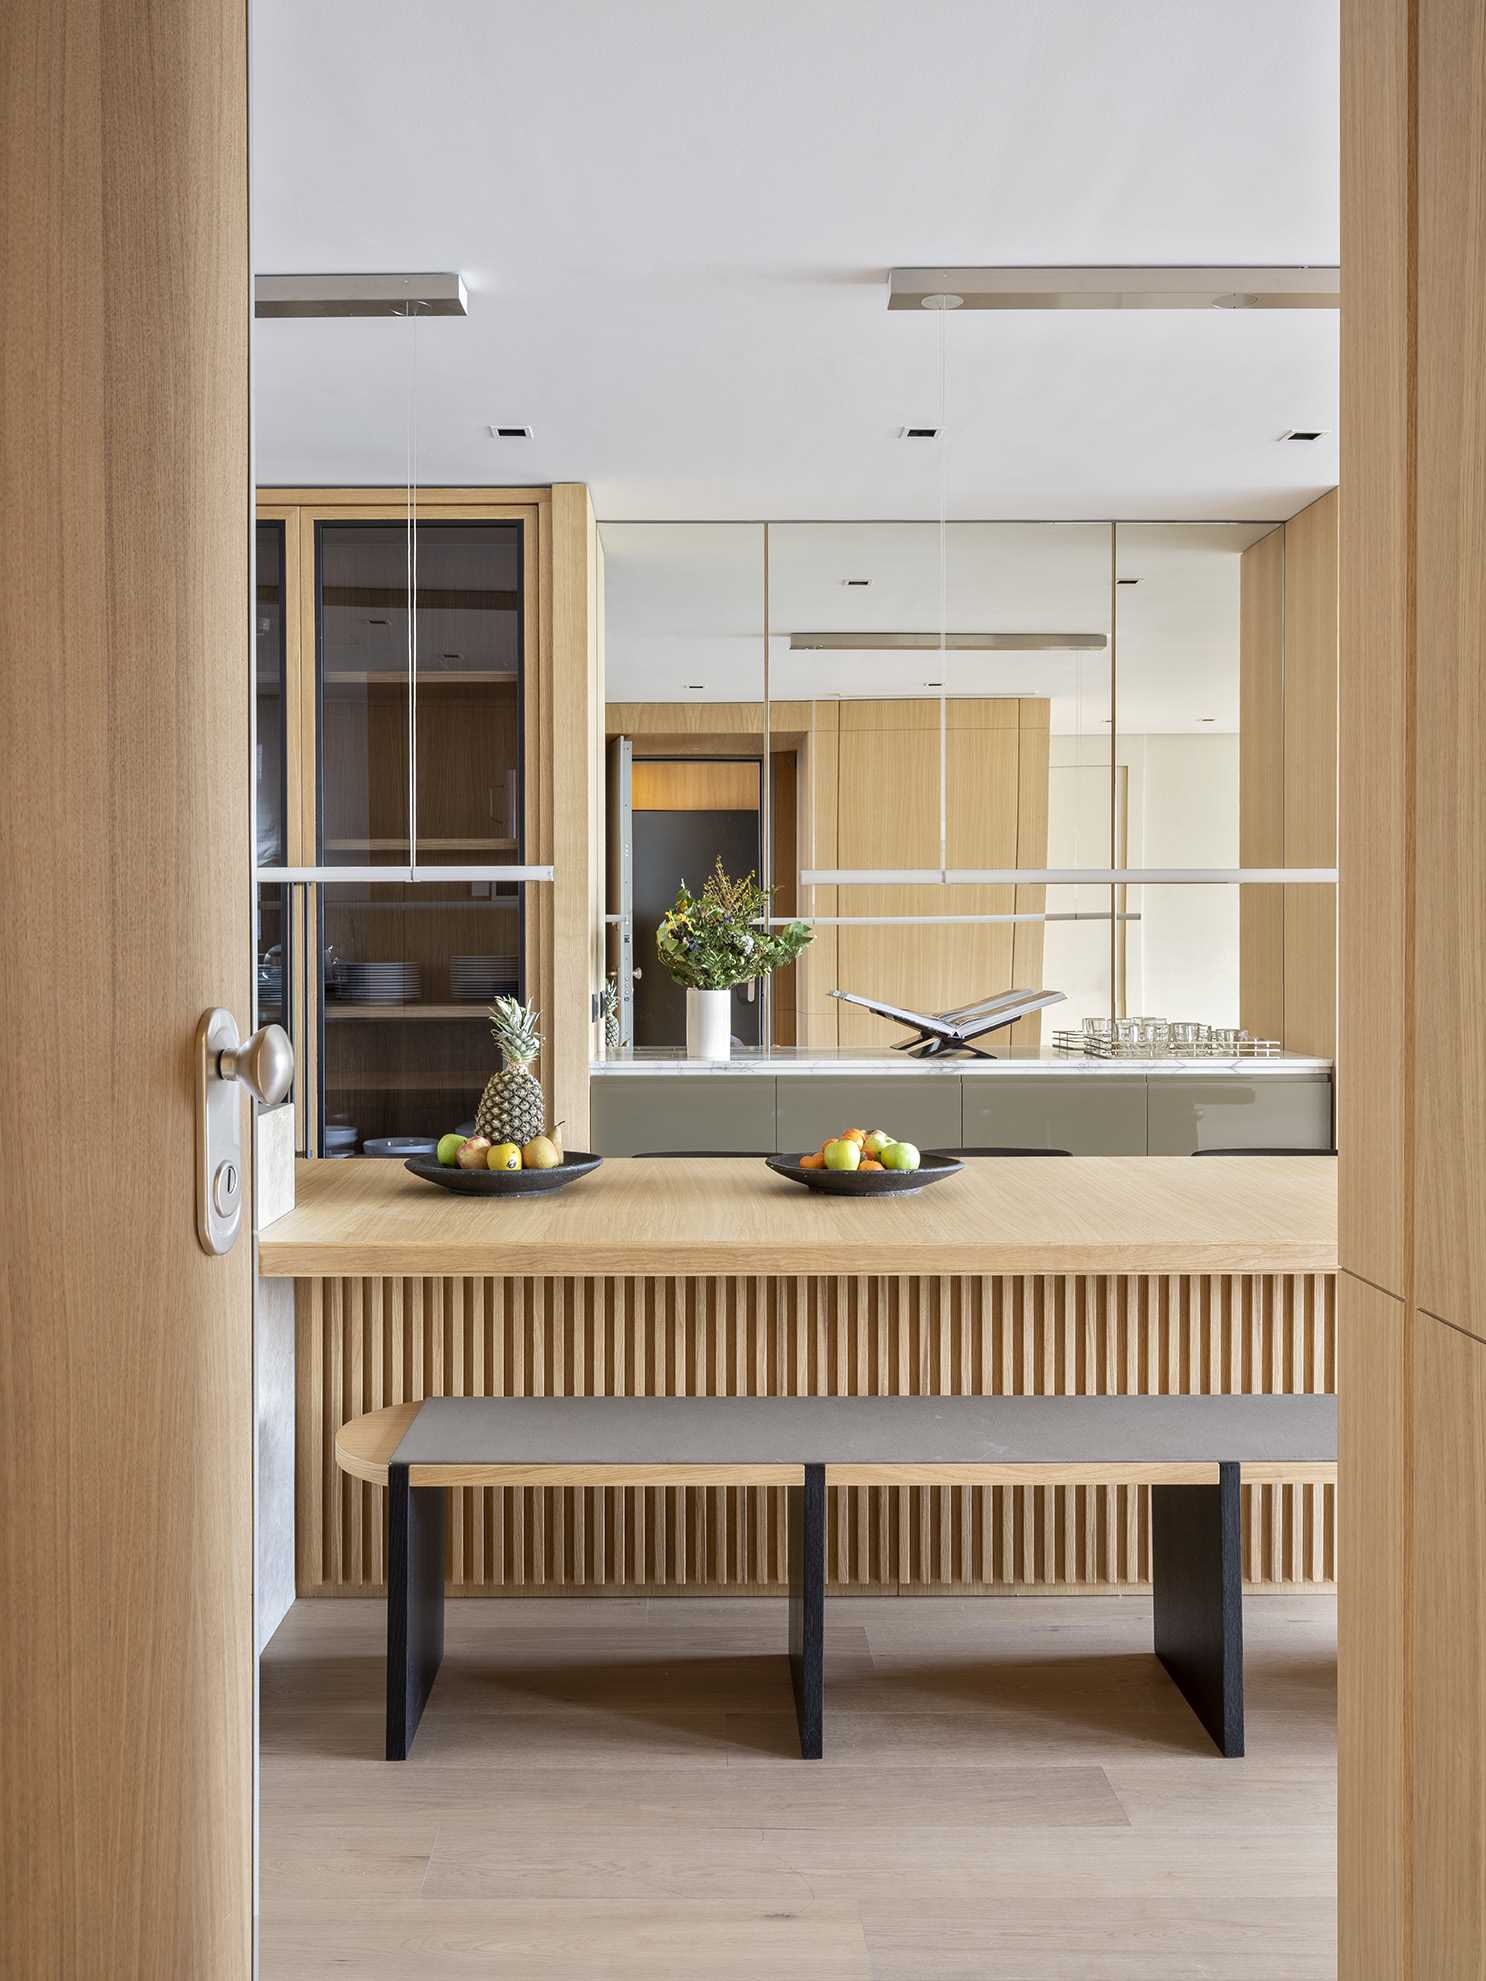 An open and spacious kitchen layout has been designed to invite engagement, where a marble bar and a long wooden dining table play host. A mirrored wall has also been included in this space.